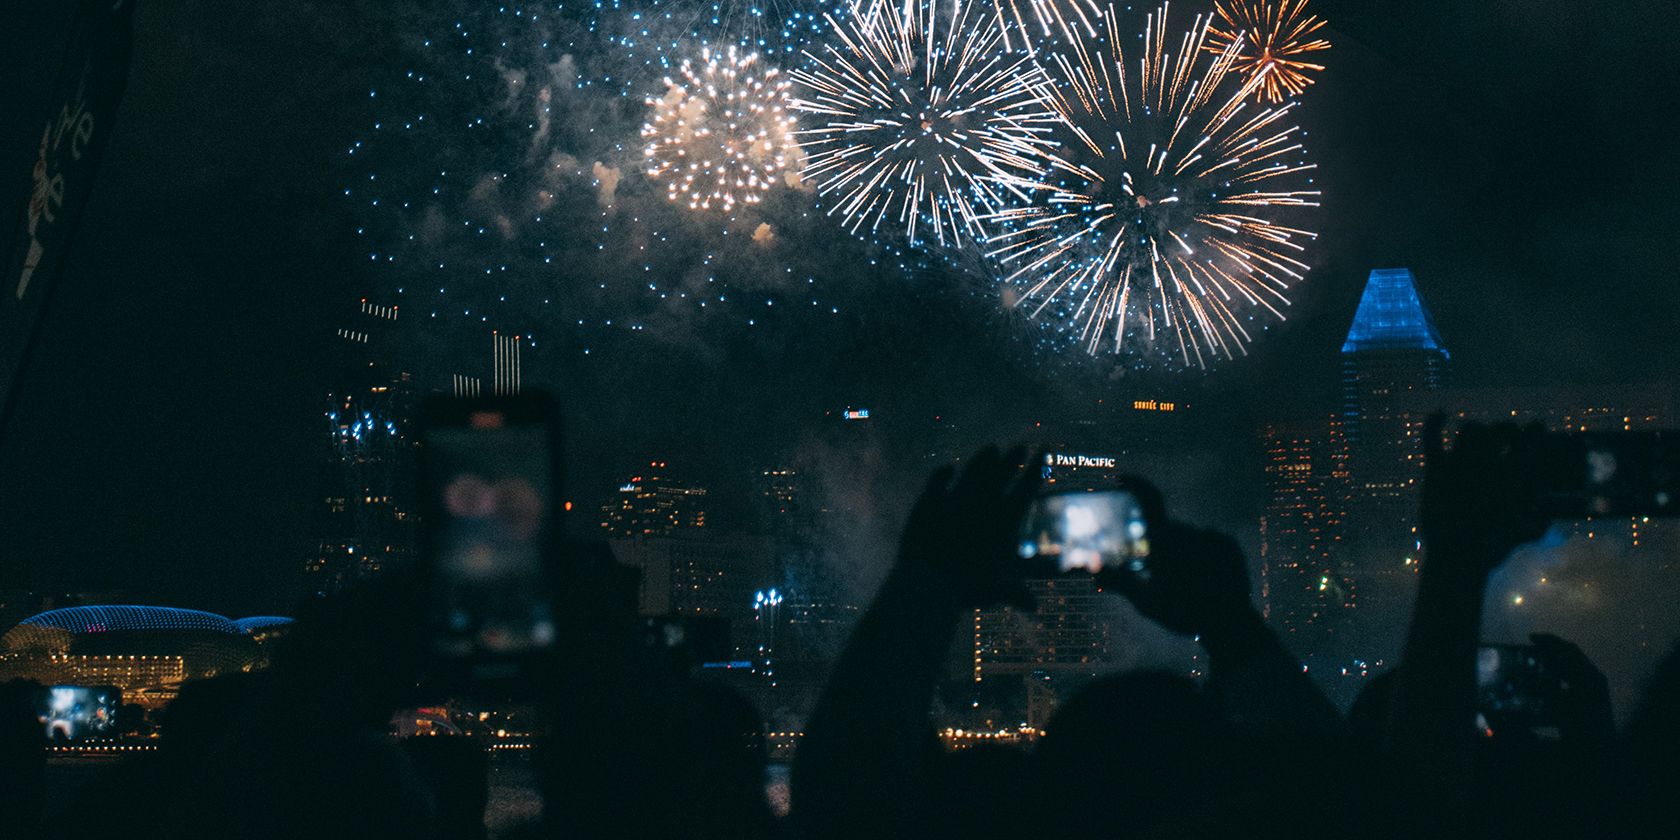 How to Take Incredible Fireworks Photos Using a Smartphone: 10 Tips